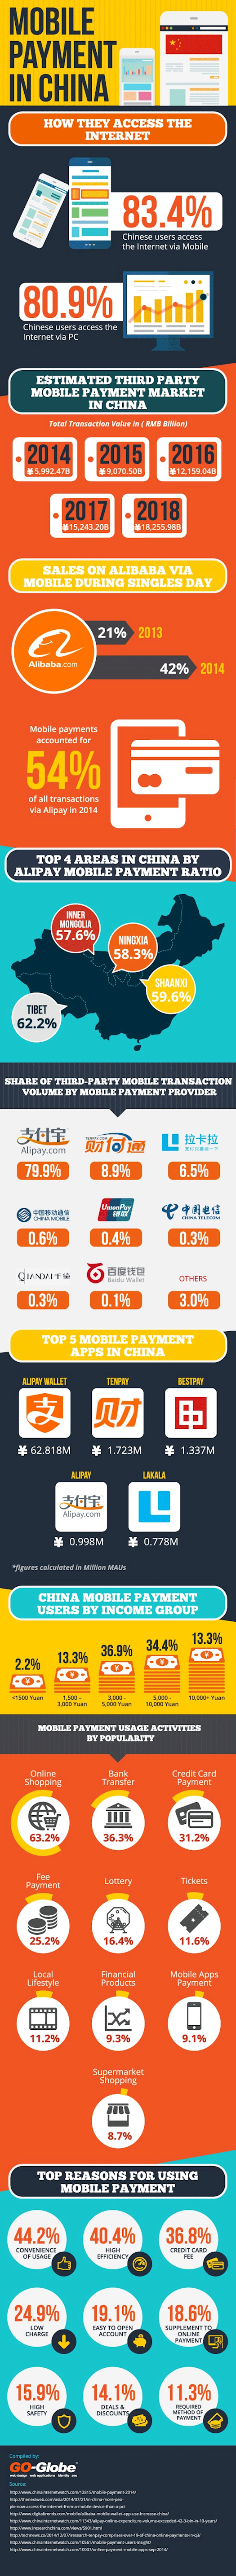 Mobile Payment in China – Statistics and Trends [Infographic]